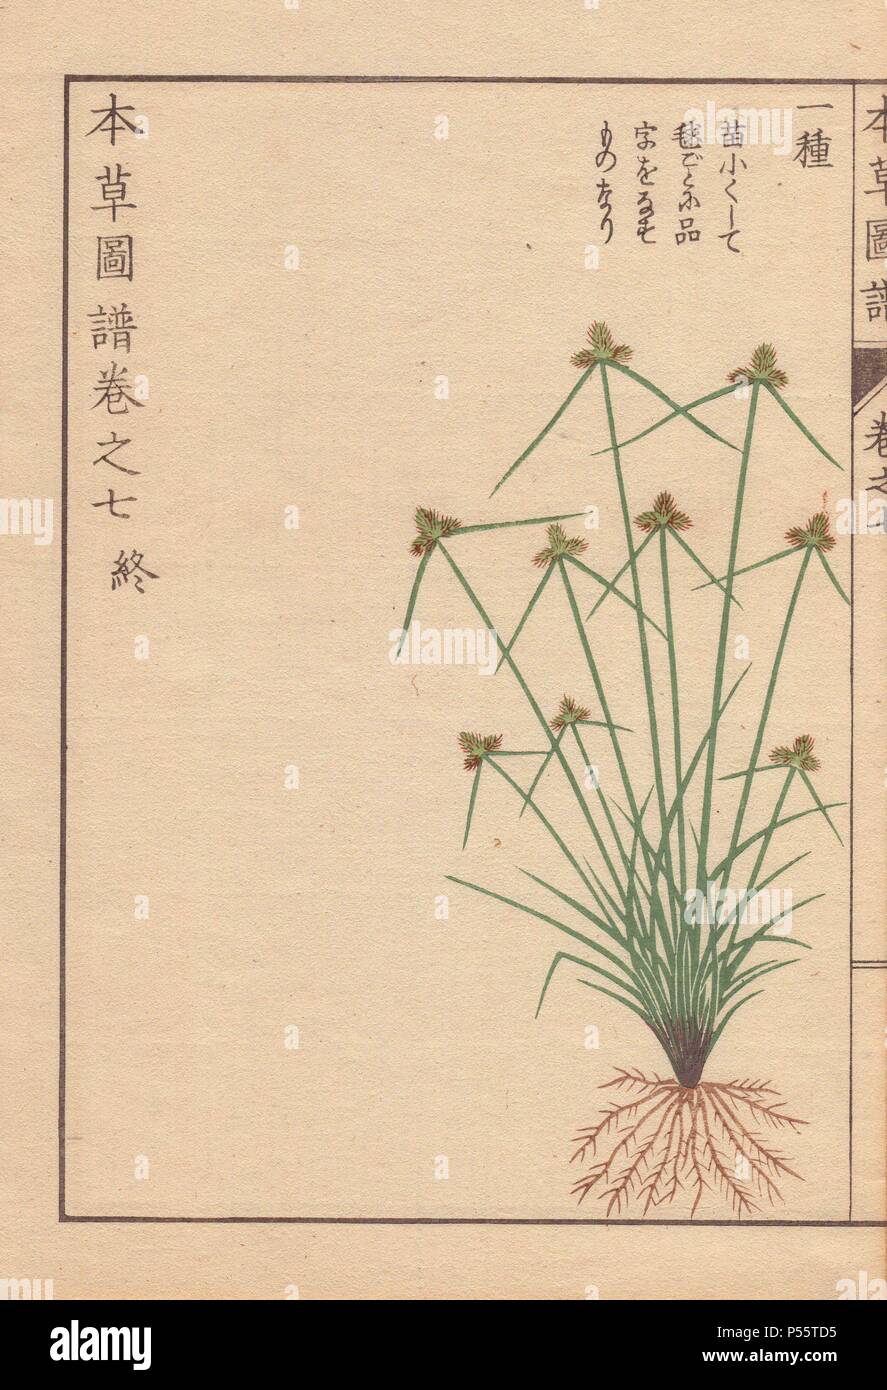 Roots, grass and flowers of halfchaff sedge, Lipocarpha microcephala Kunth. . Colour-printed woodblock engraving by Kan'en Iwasaki from 'Honzo Zufu,' an Illustrated Guide to Medicinal Plants, 1884. Iwasaki (1786-1842) was a Japanese botanist, entomologist and zoologist. He was one of the first Japanese botanists to incorporate western knowledge into his studies. Stock Photo